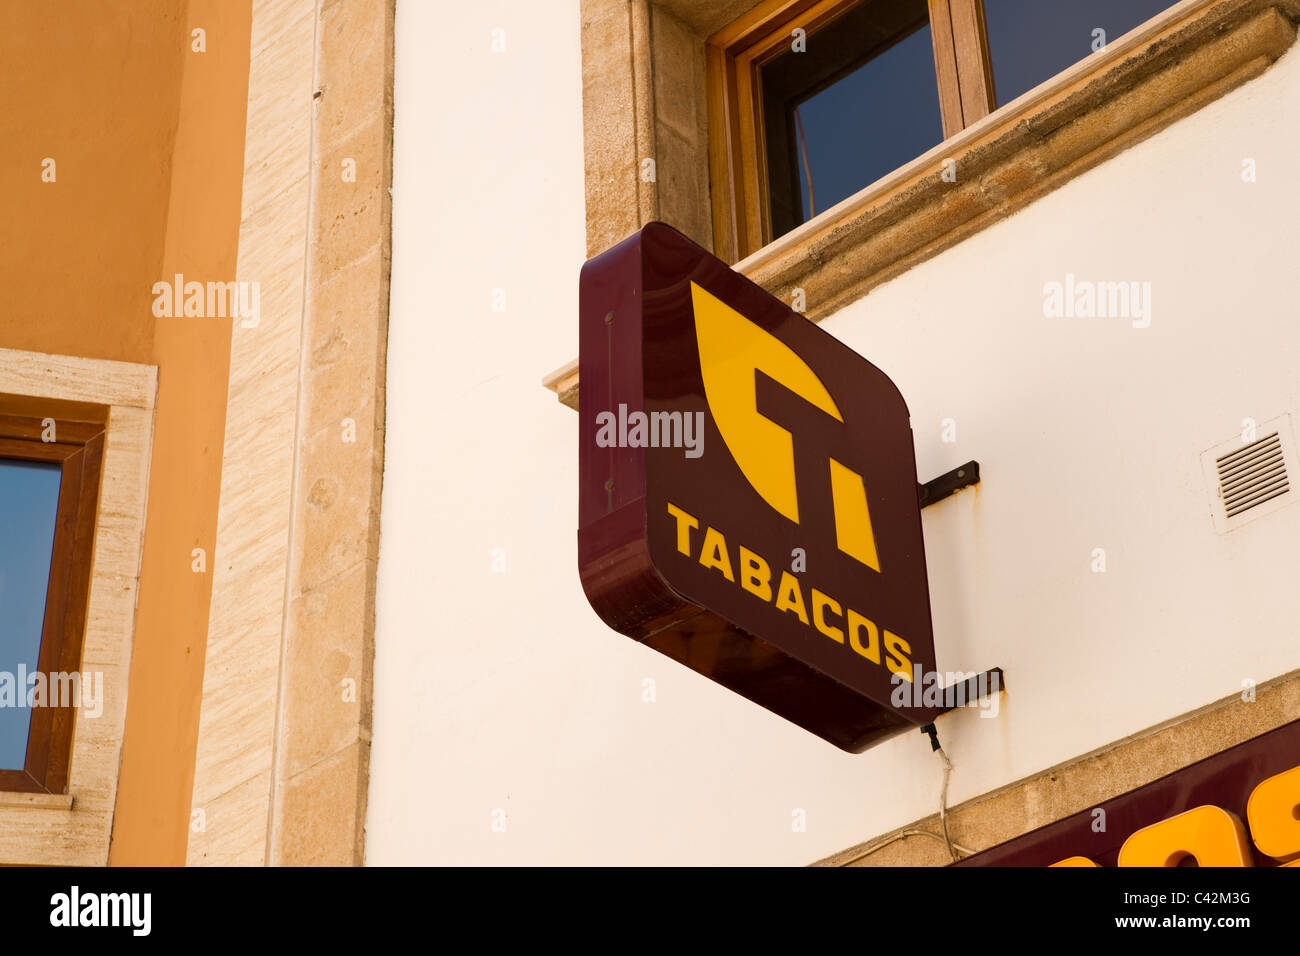 wall mounted tobacconist sign in spain Stock Photo